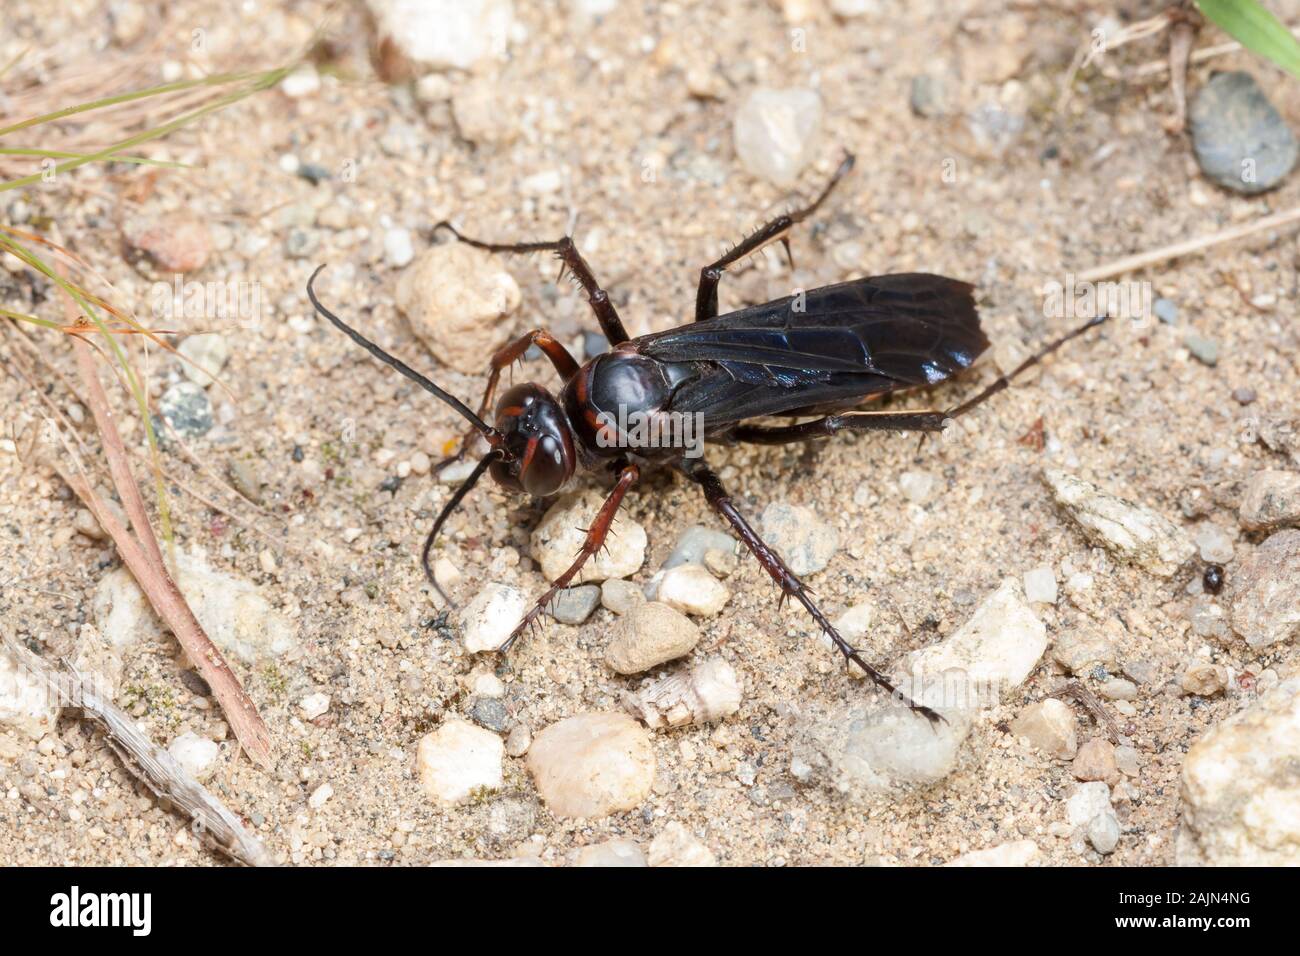 A Spider Wasp (Poecilopompilus sp.) perches on a dirt trail. Stock Photo